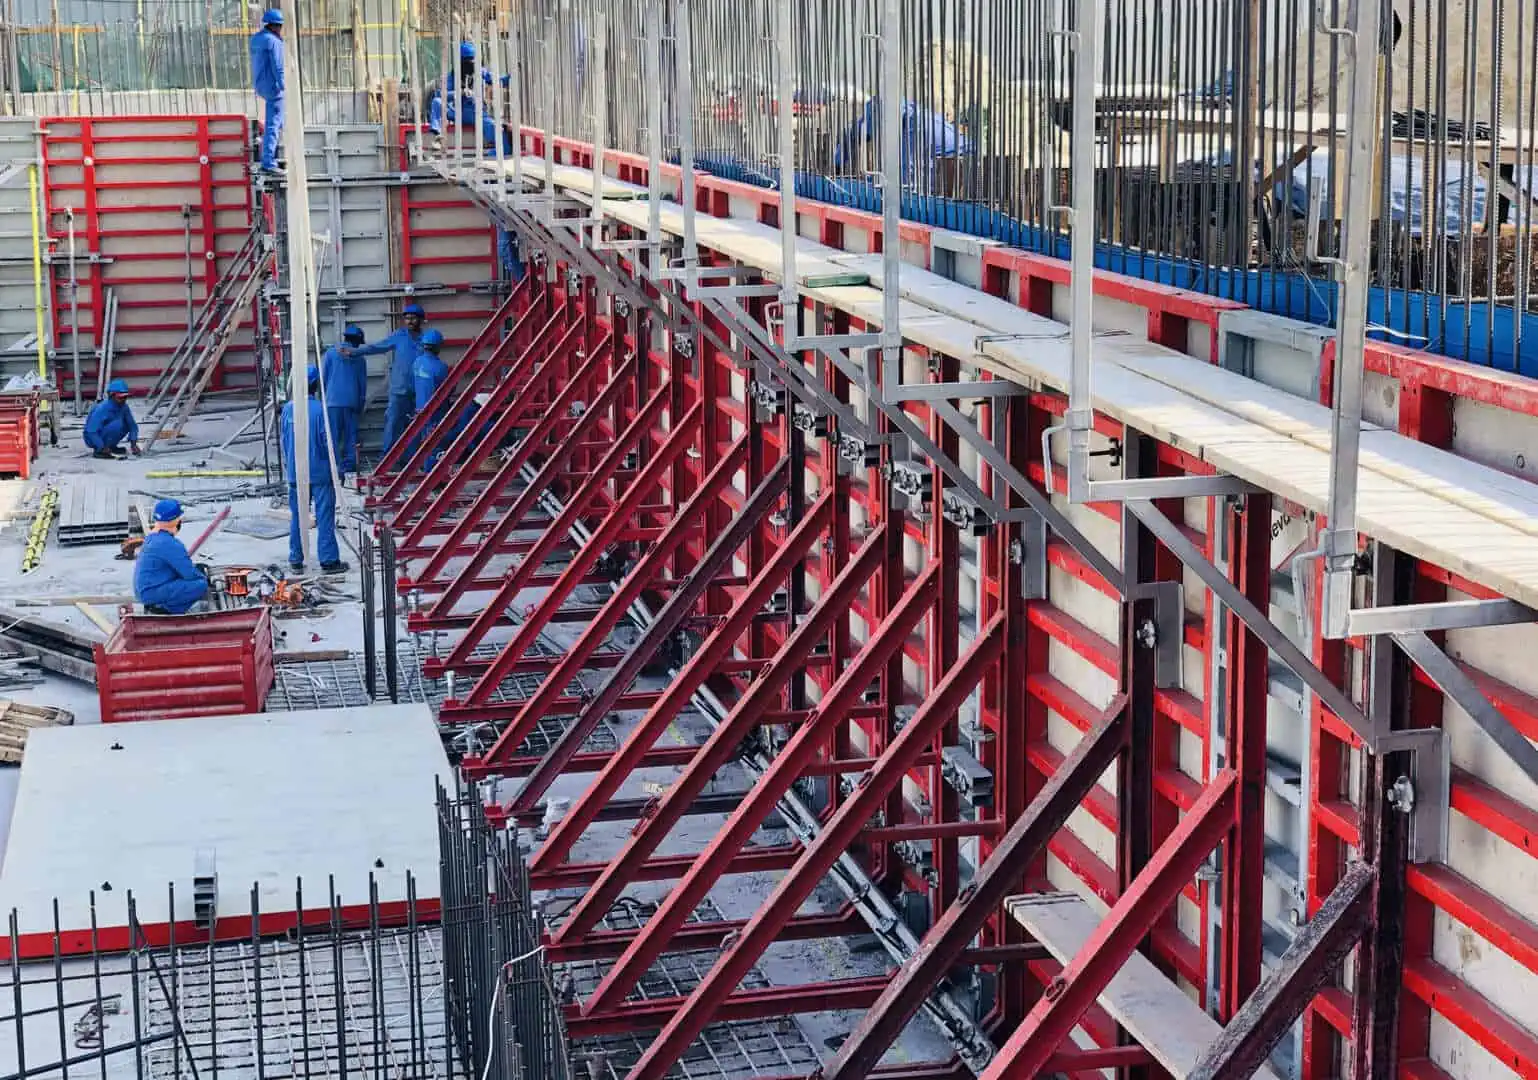 An incredible structure being built on a construction site, adorned with red and white colors.